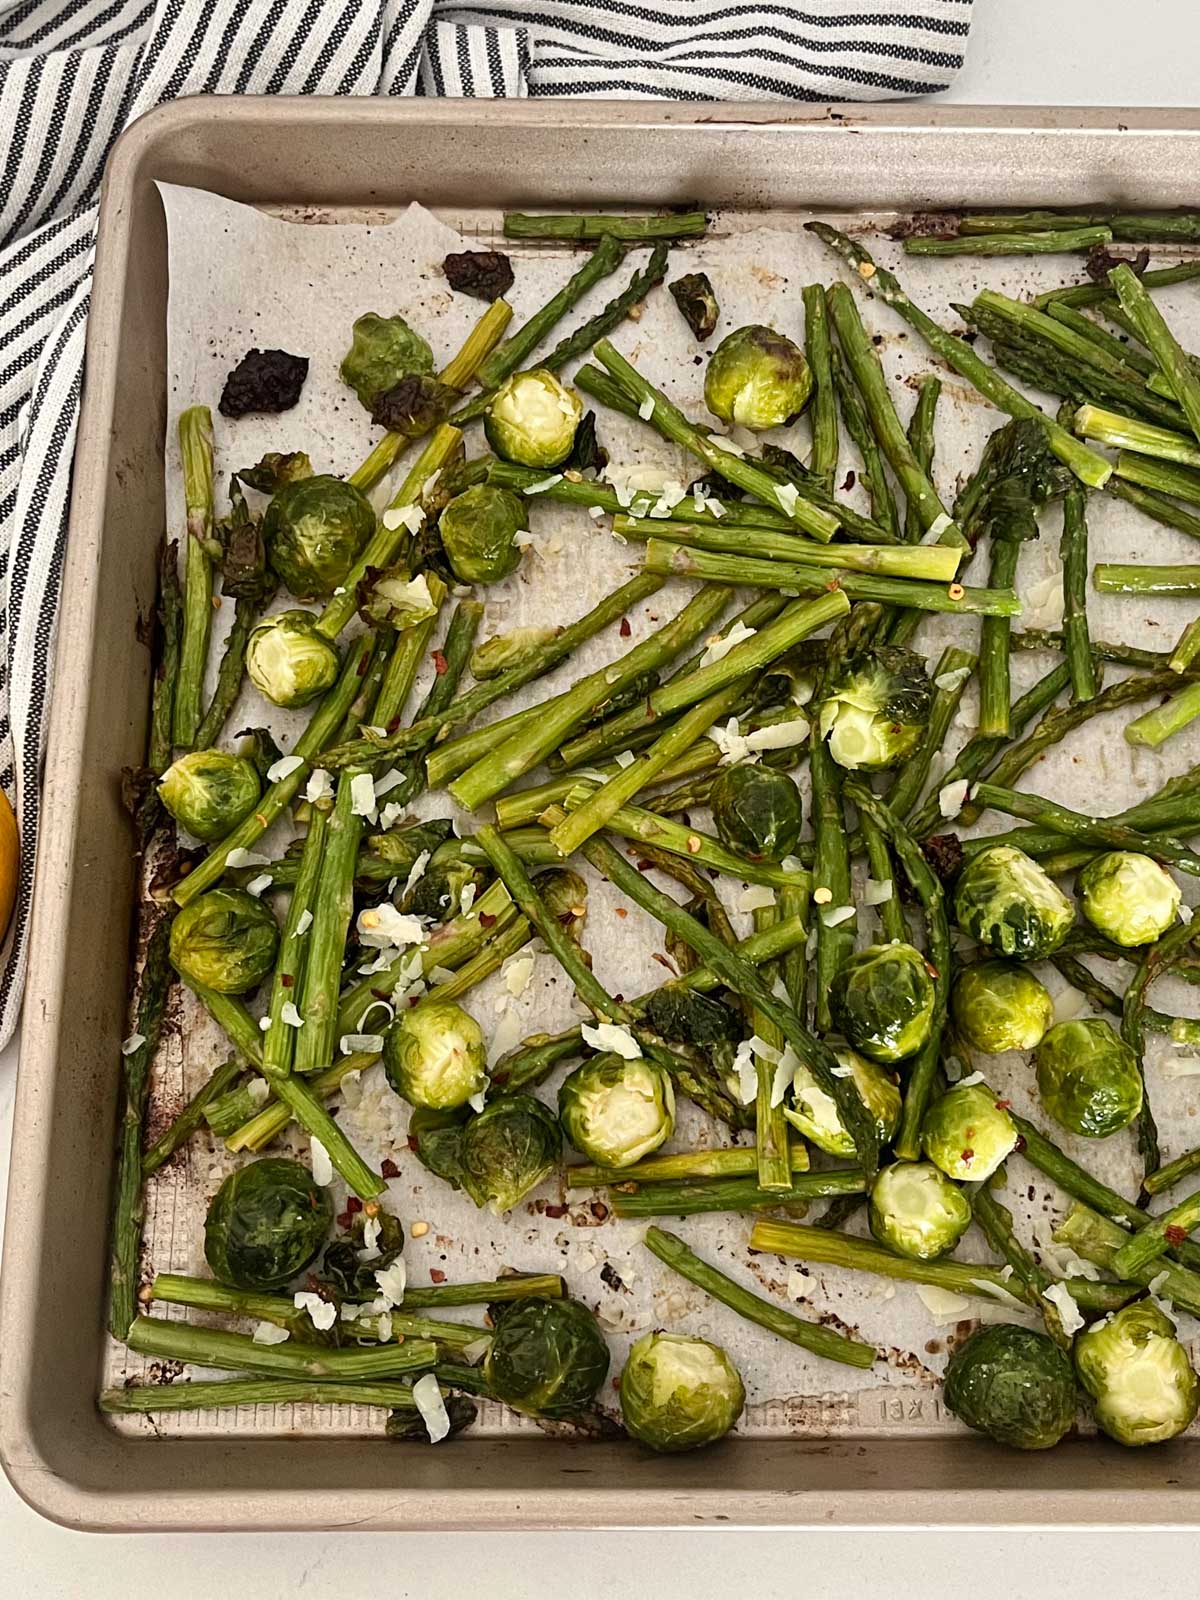 Roasted brussels sprouts and asaparagus on a sheet pan.